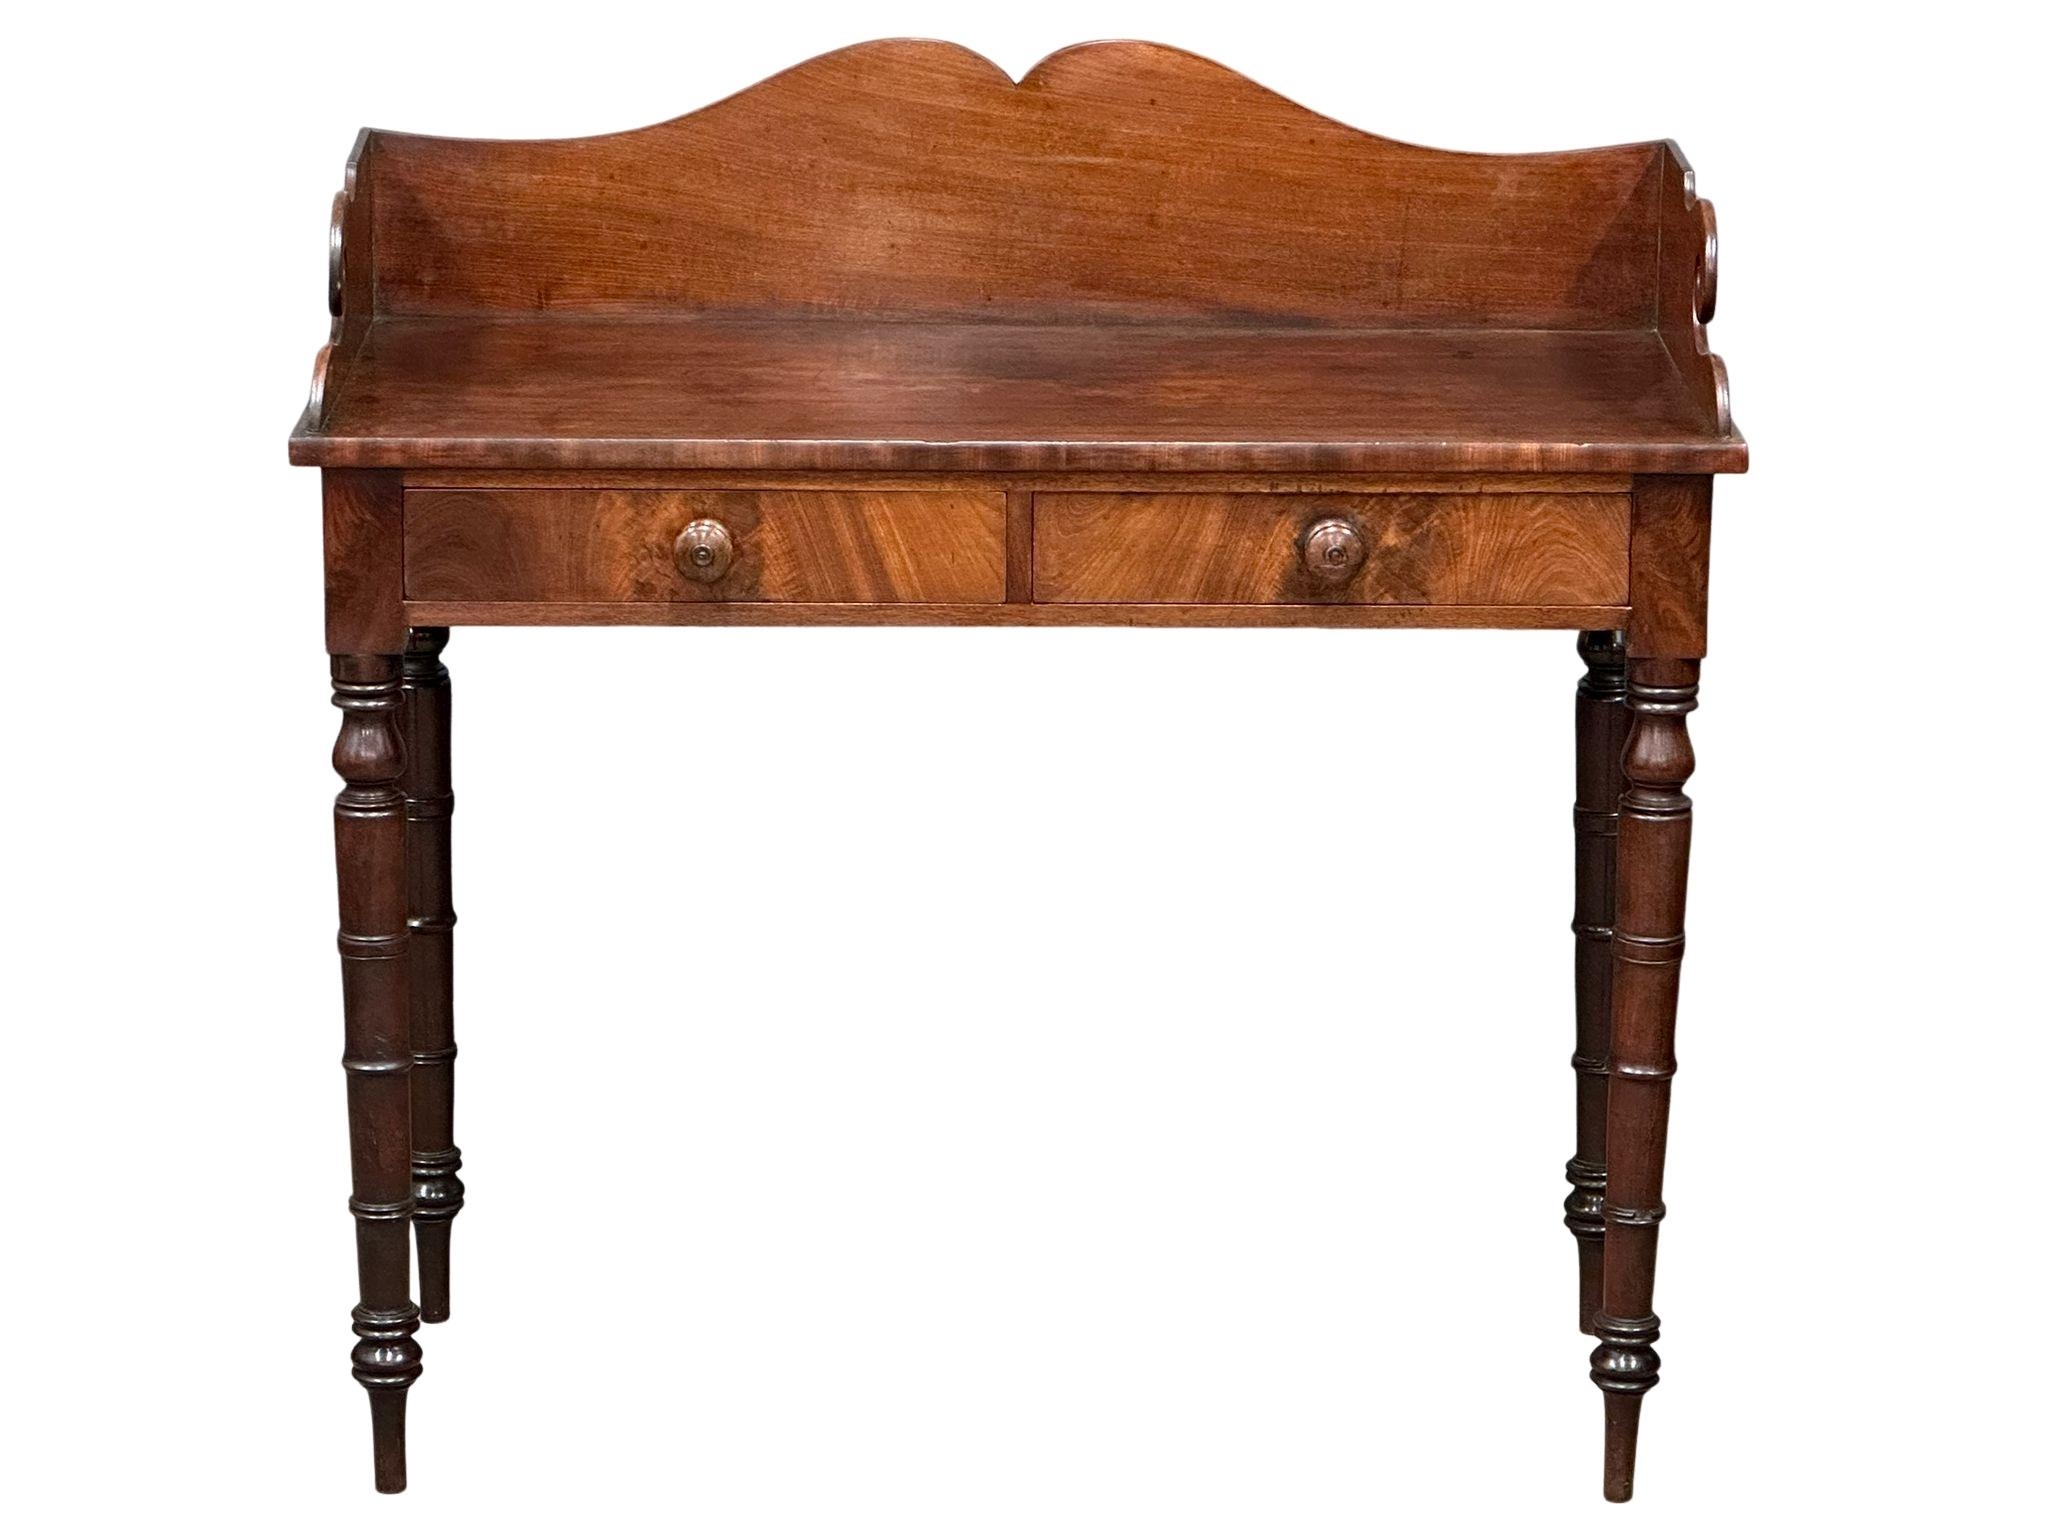 A late George IV mahogany gallery back side table on reeded legs, containing 2 front facing drawers. - Image 5 of 10